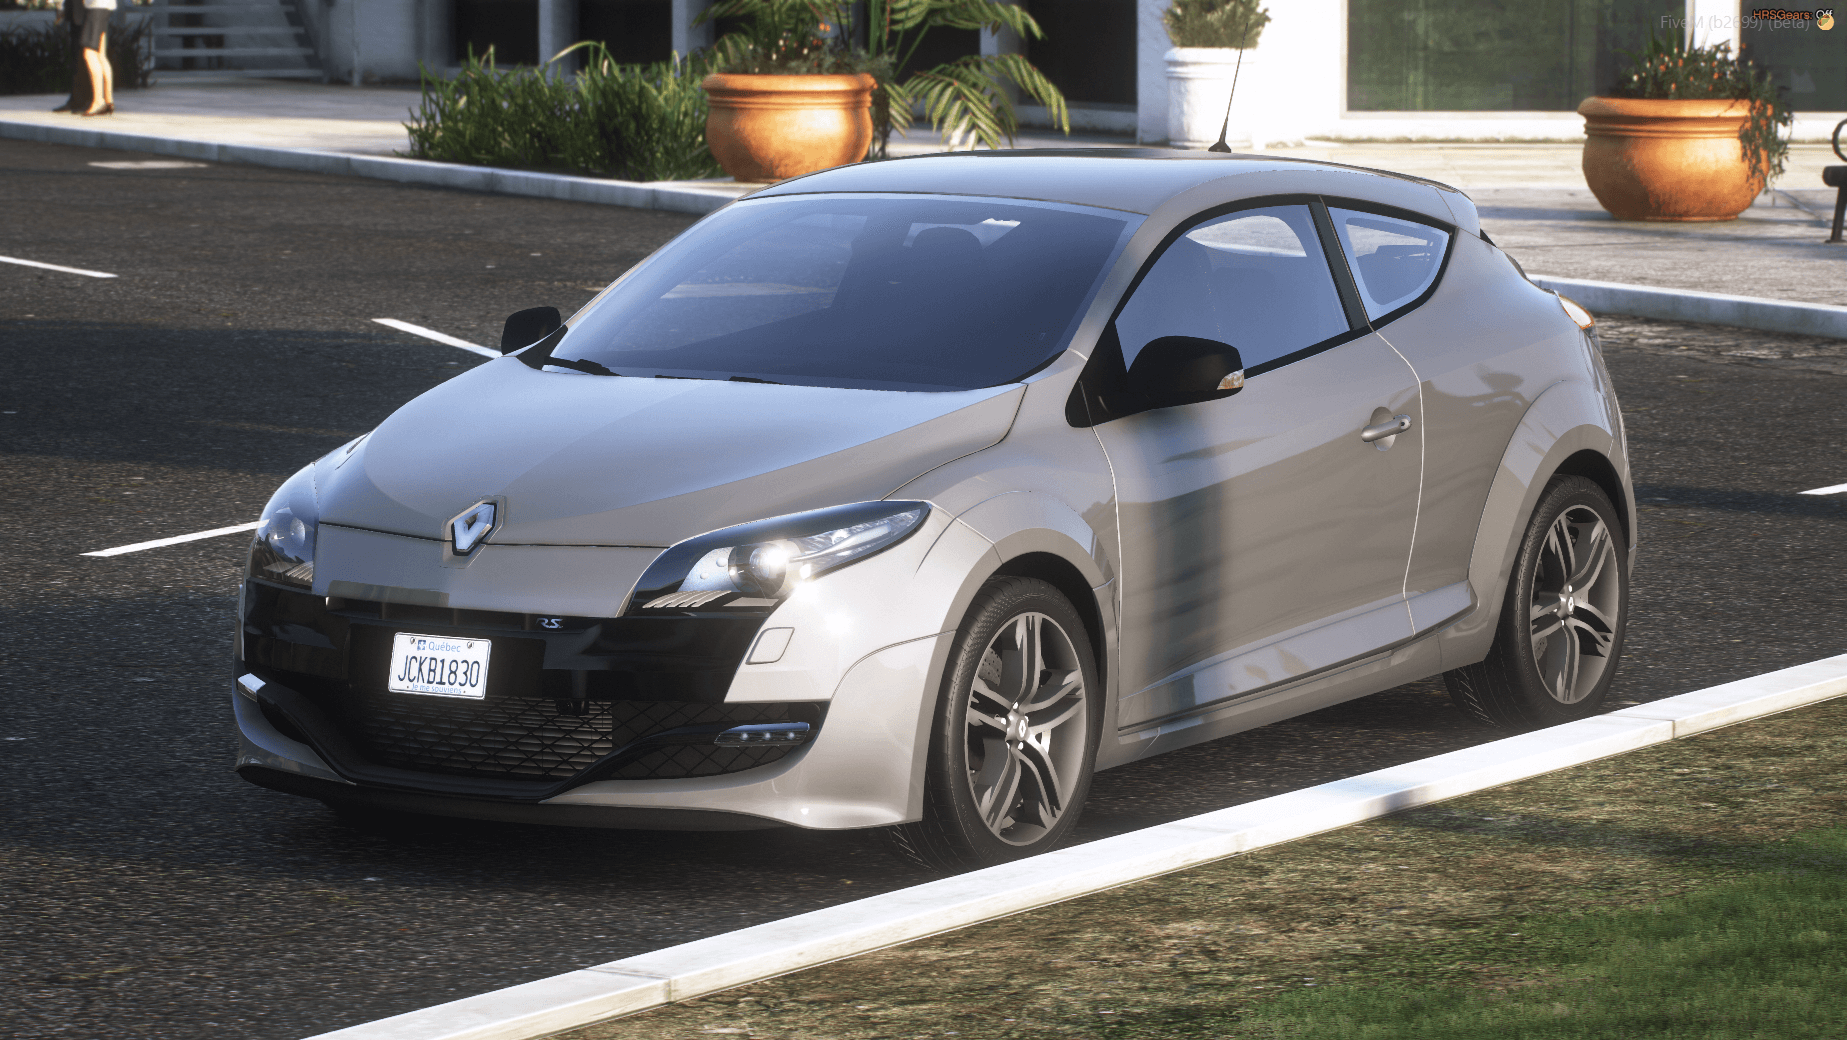 https://img.gta5-mods.com/q95/images/renault-megane-iii-rs-2009-add-on-tuning-fivem-replace/78619f-m1.png